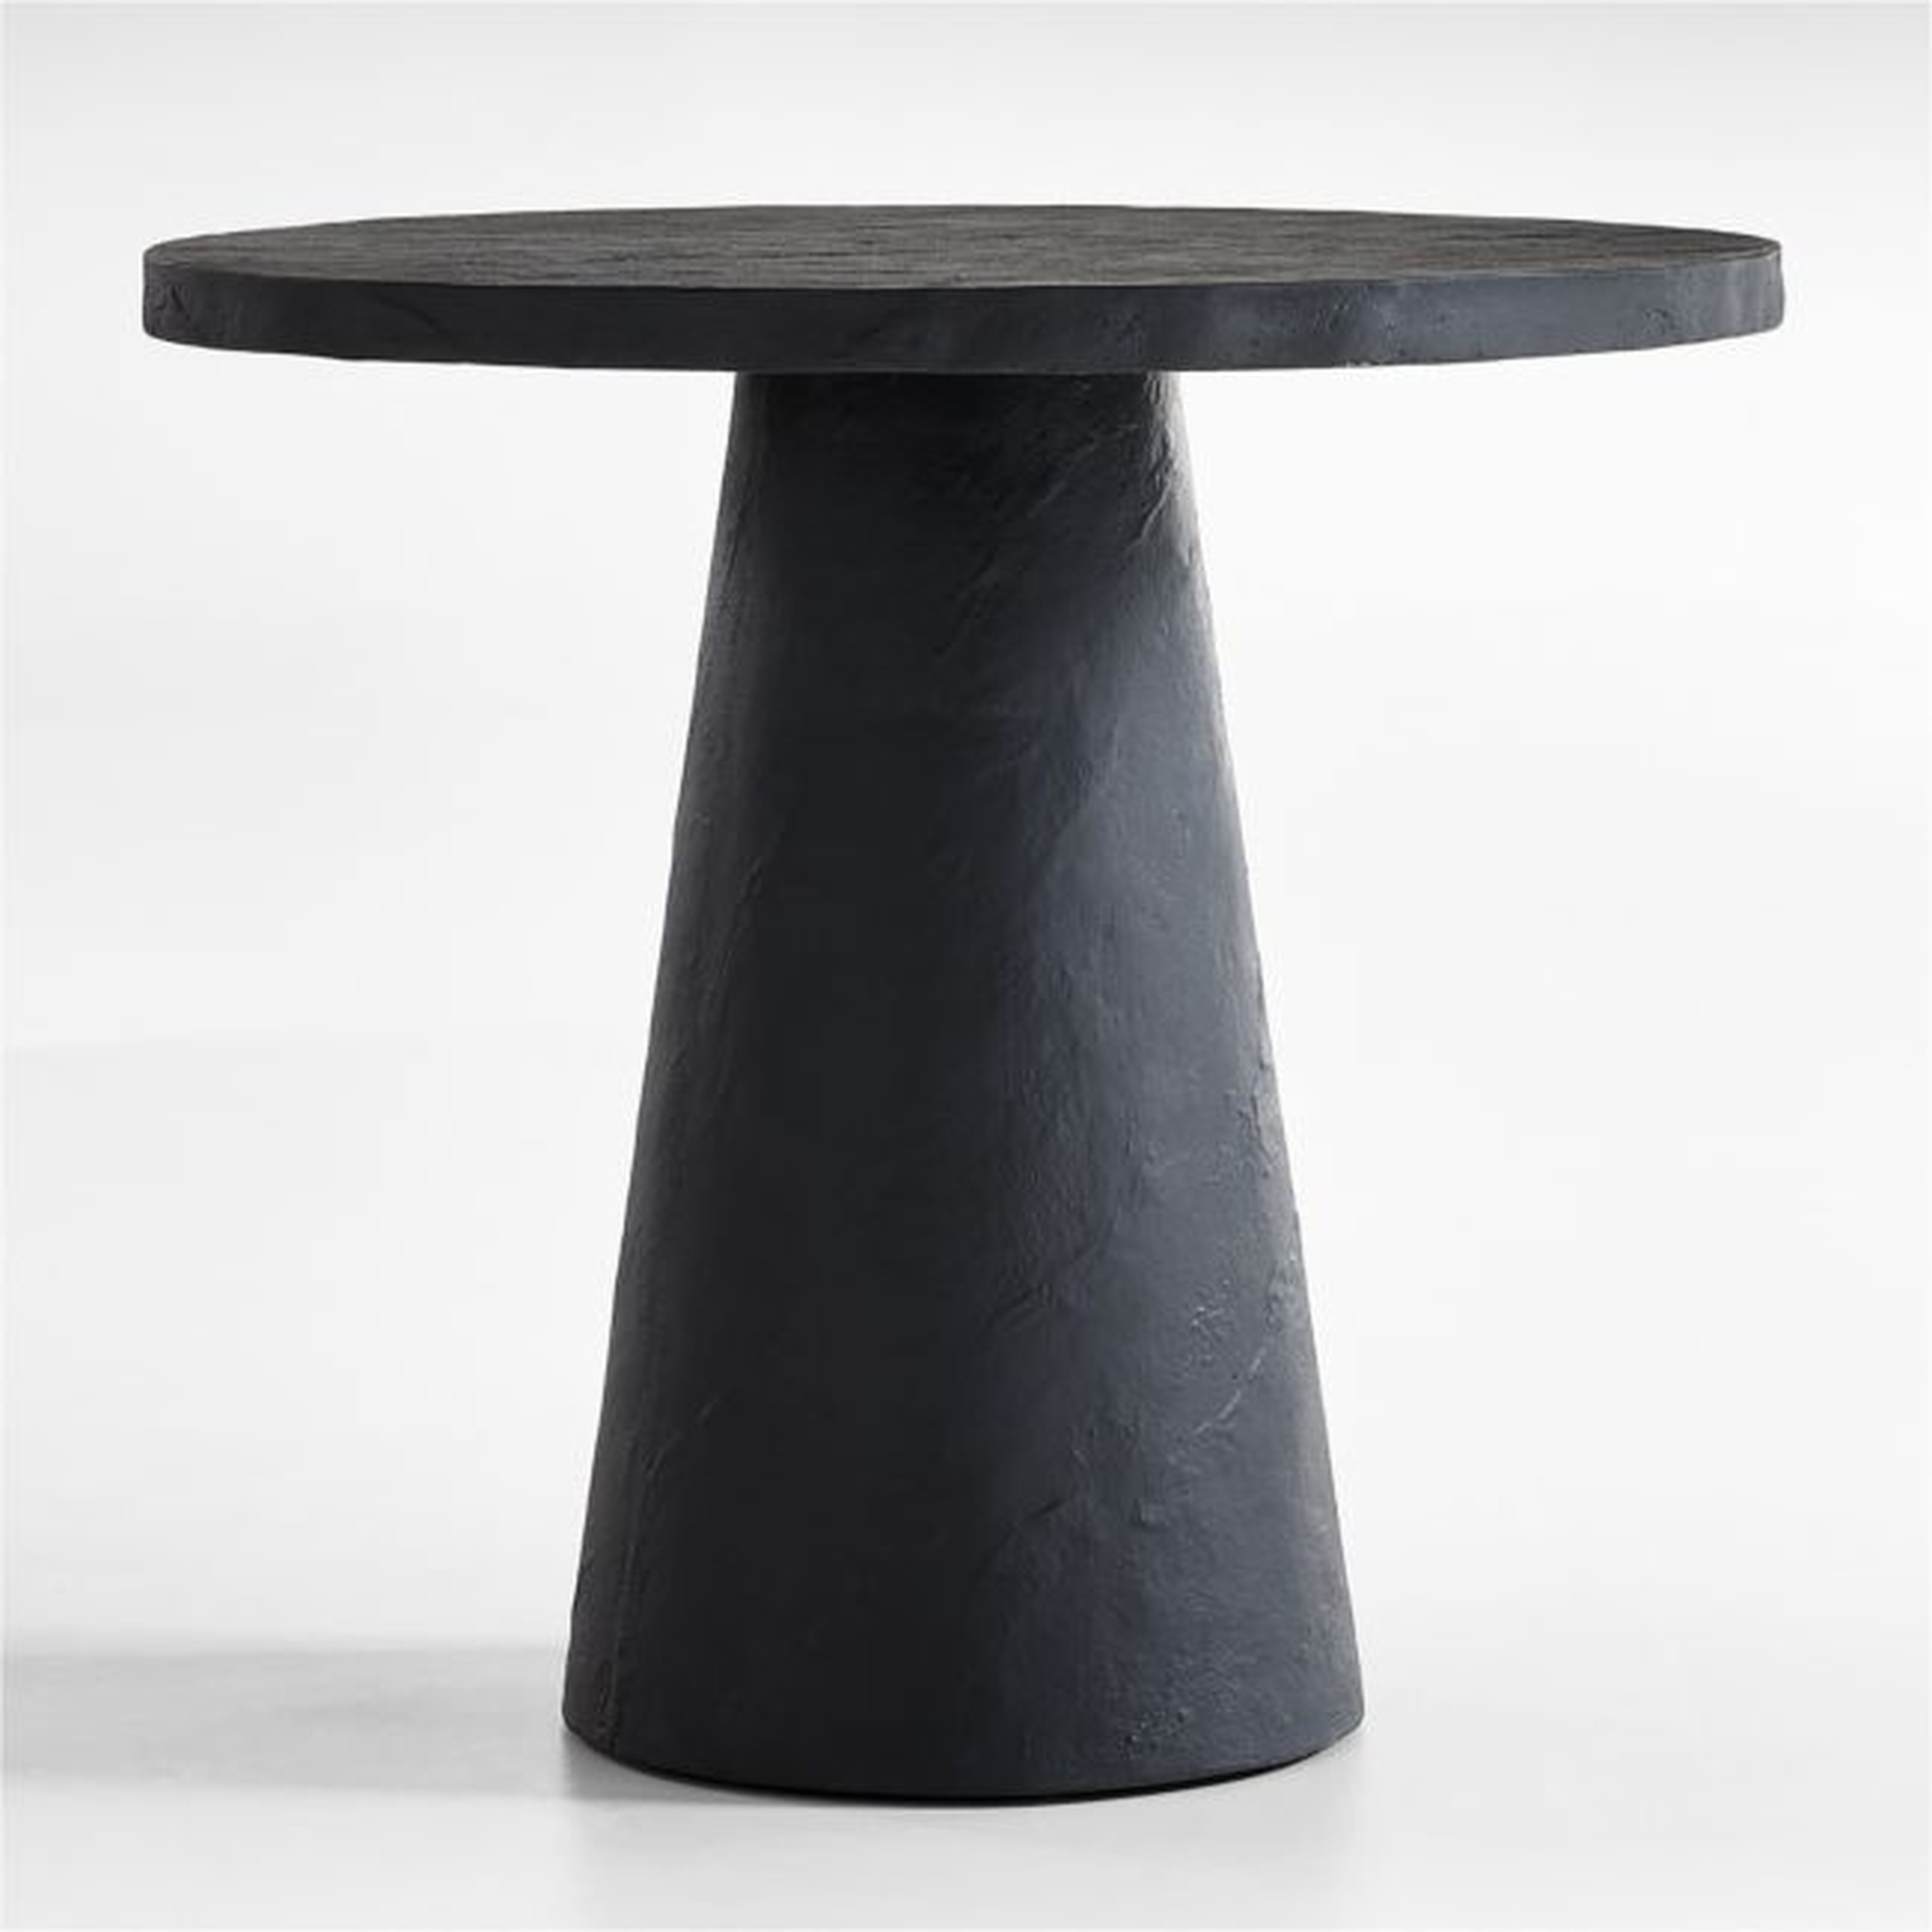 Willy Charcoal Pedestal Bistro Table by Leanne Ford - Crate and Barrel